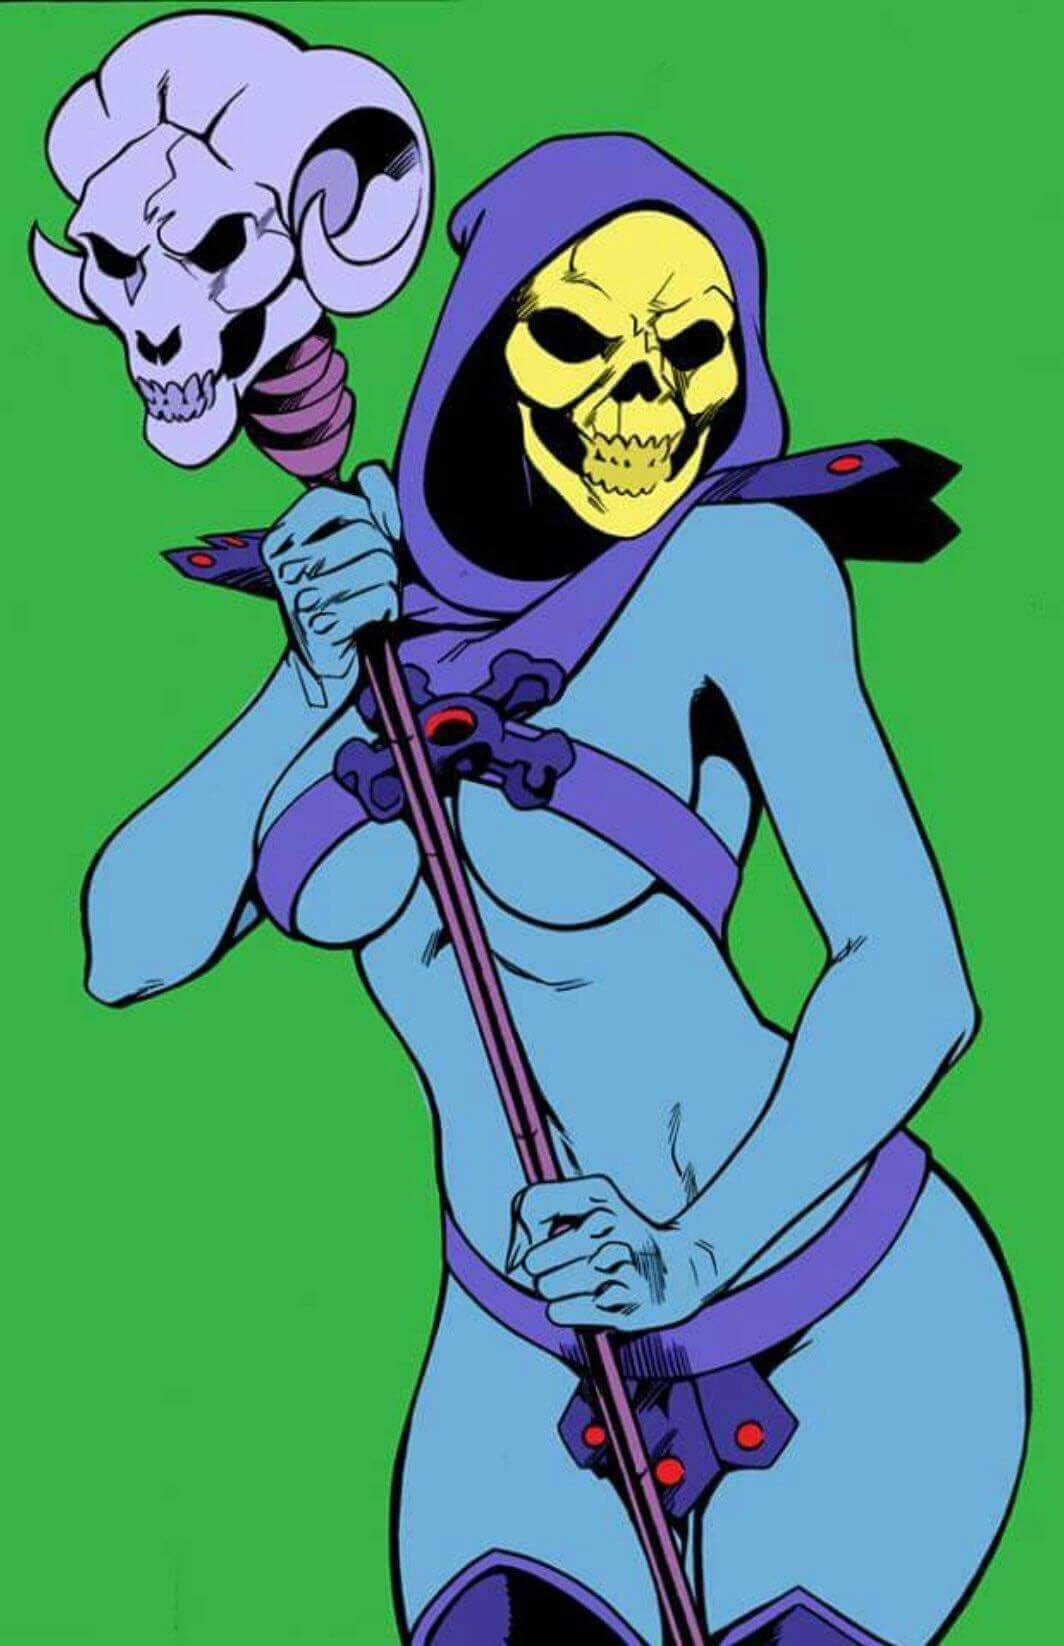 Forget Bowsette- here's sexy Skeletor! 